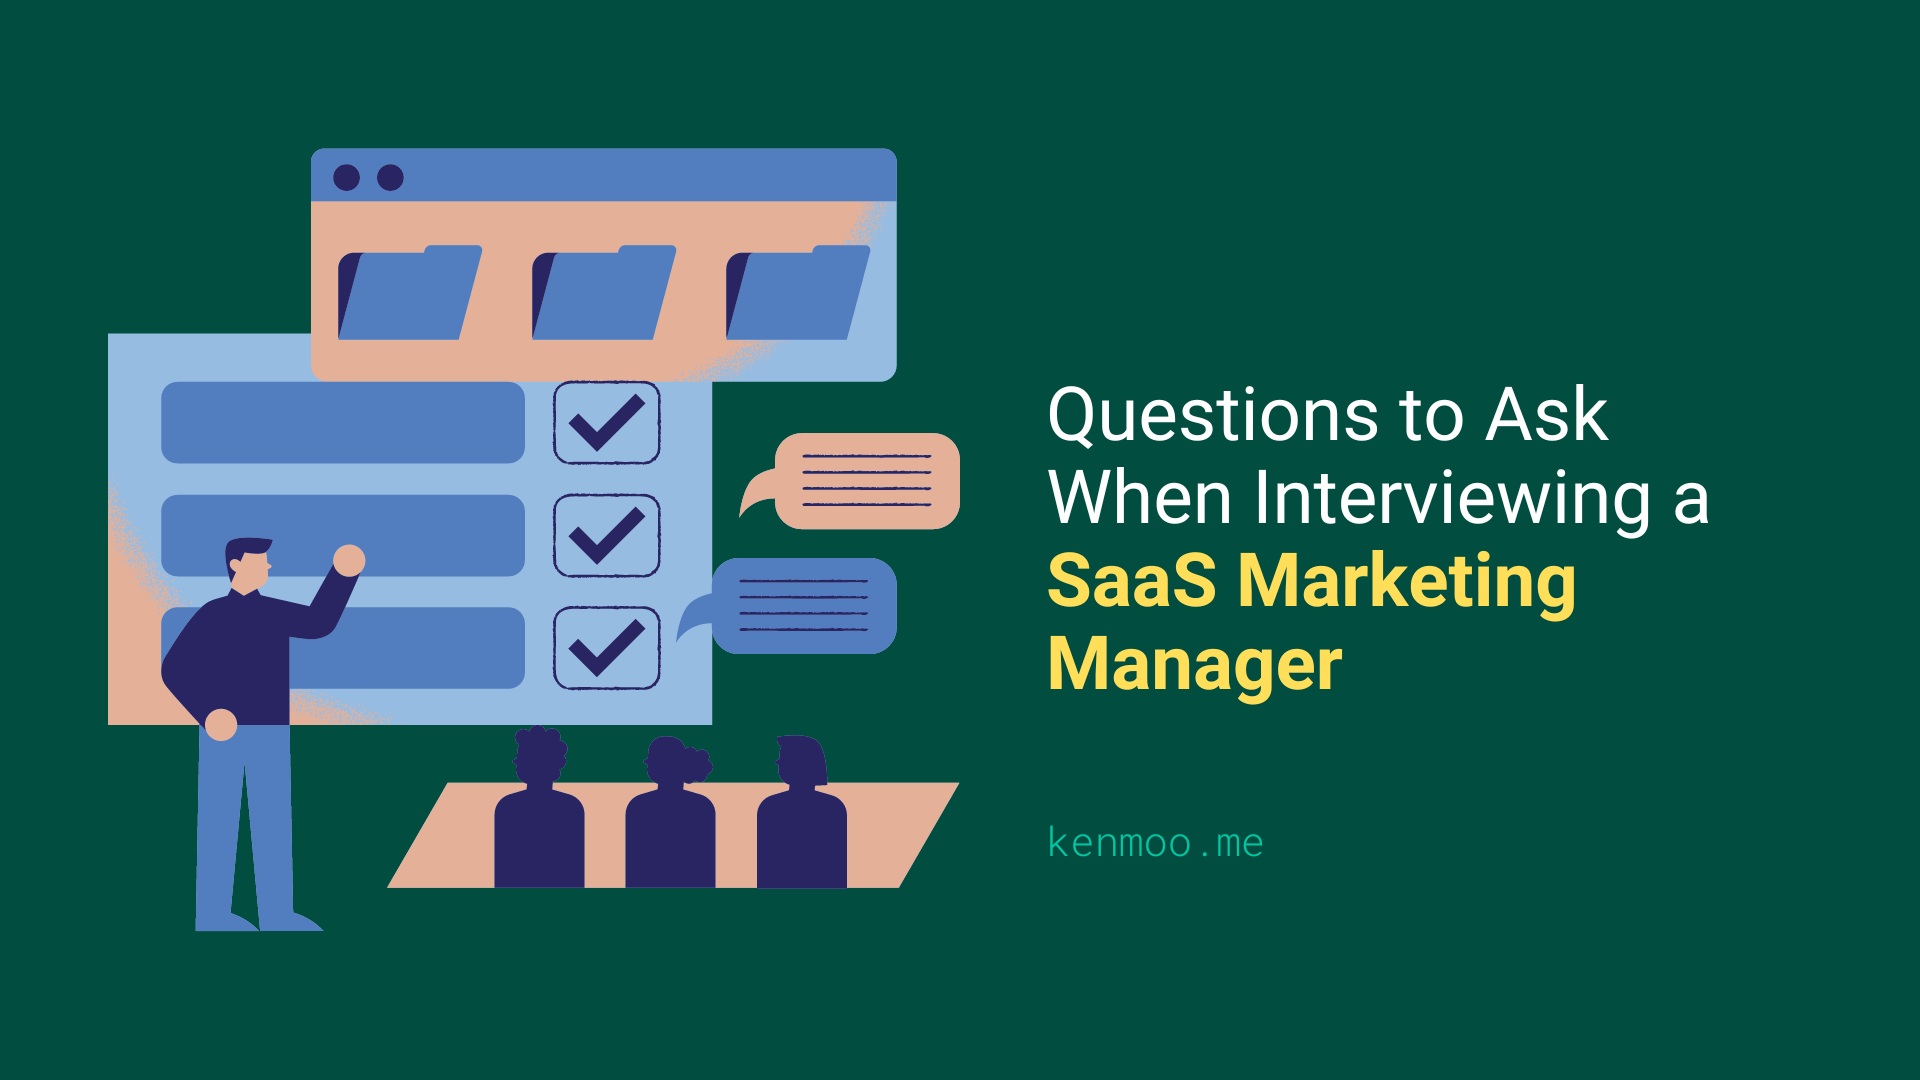 Questions to Ask When Interviewing a SaaS Marketing Manager